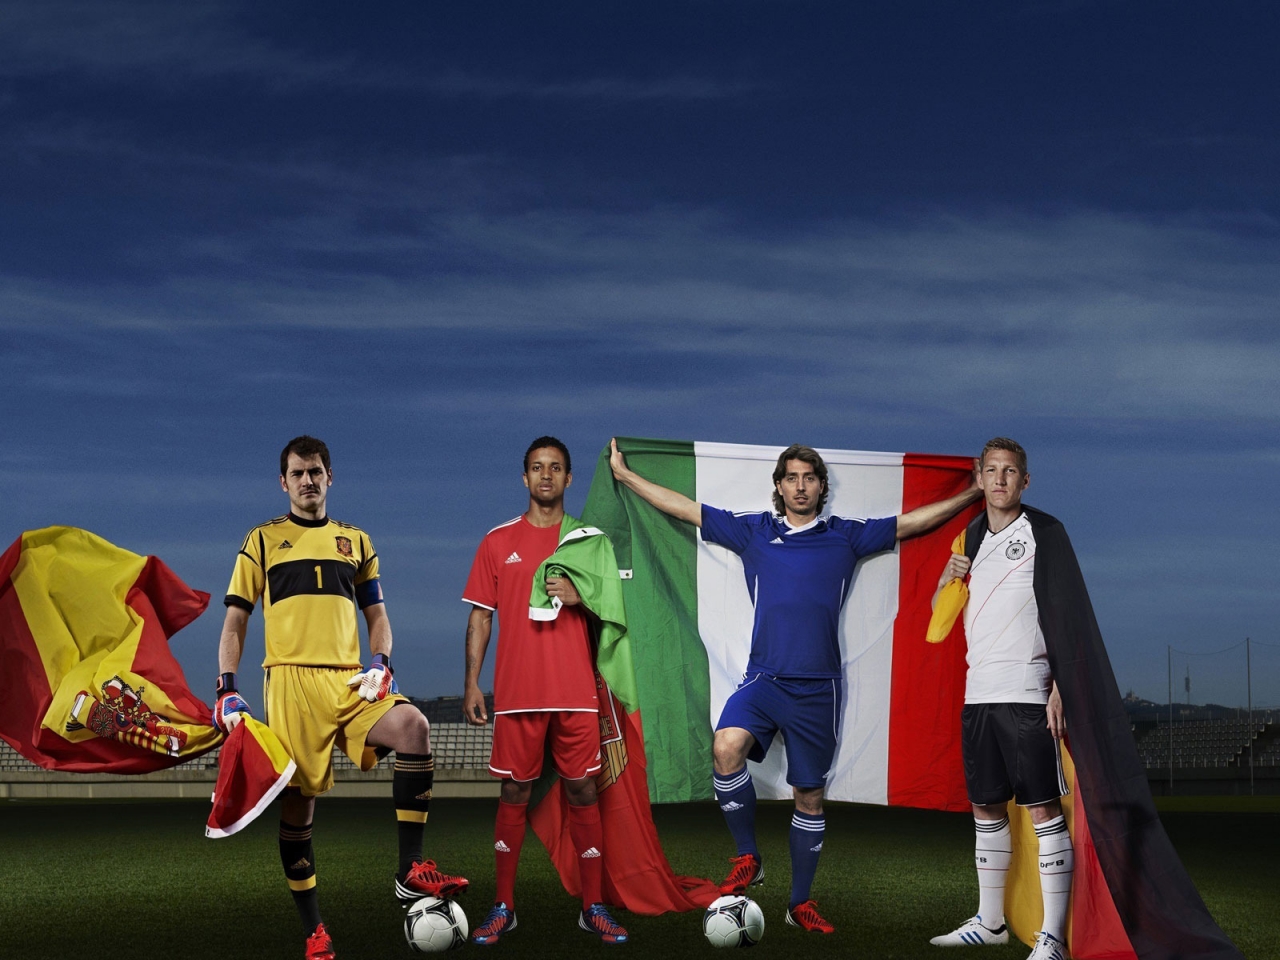 Spain Portugal Italy and Germany for 1280 x 960 resolution